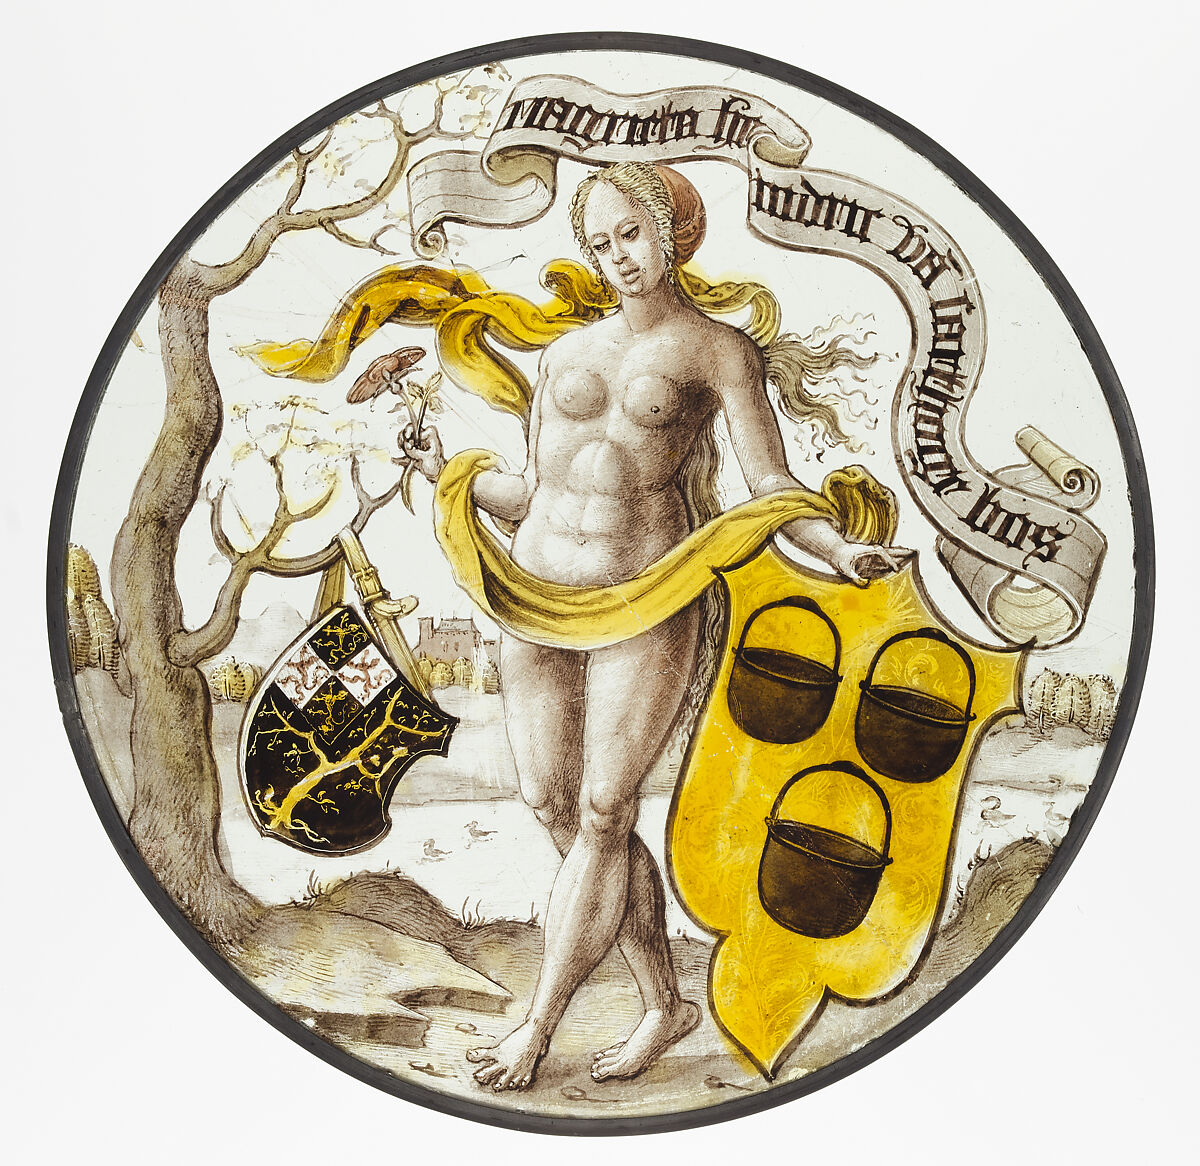 Roundel with Nude Woman Supporting a Heraldic Shield, Colorless glass, vitreous paint and silver stain, North Netherlandish 